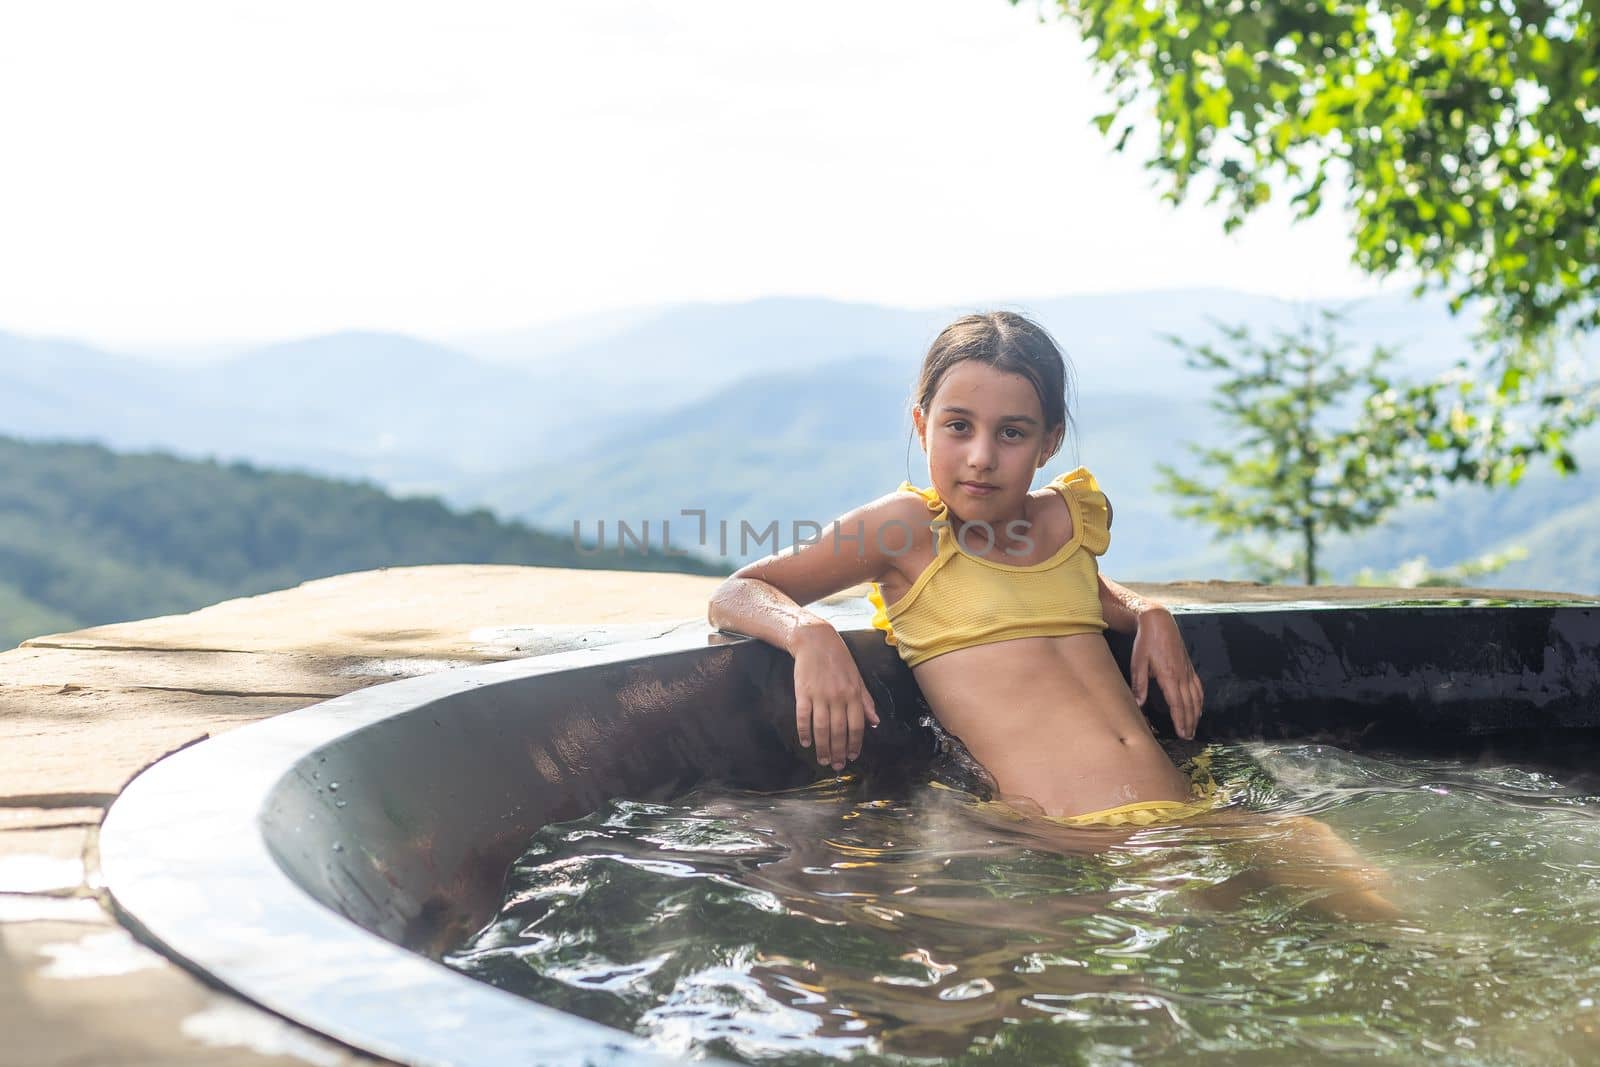 little girl in a hot tub in the mountains, summer.